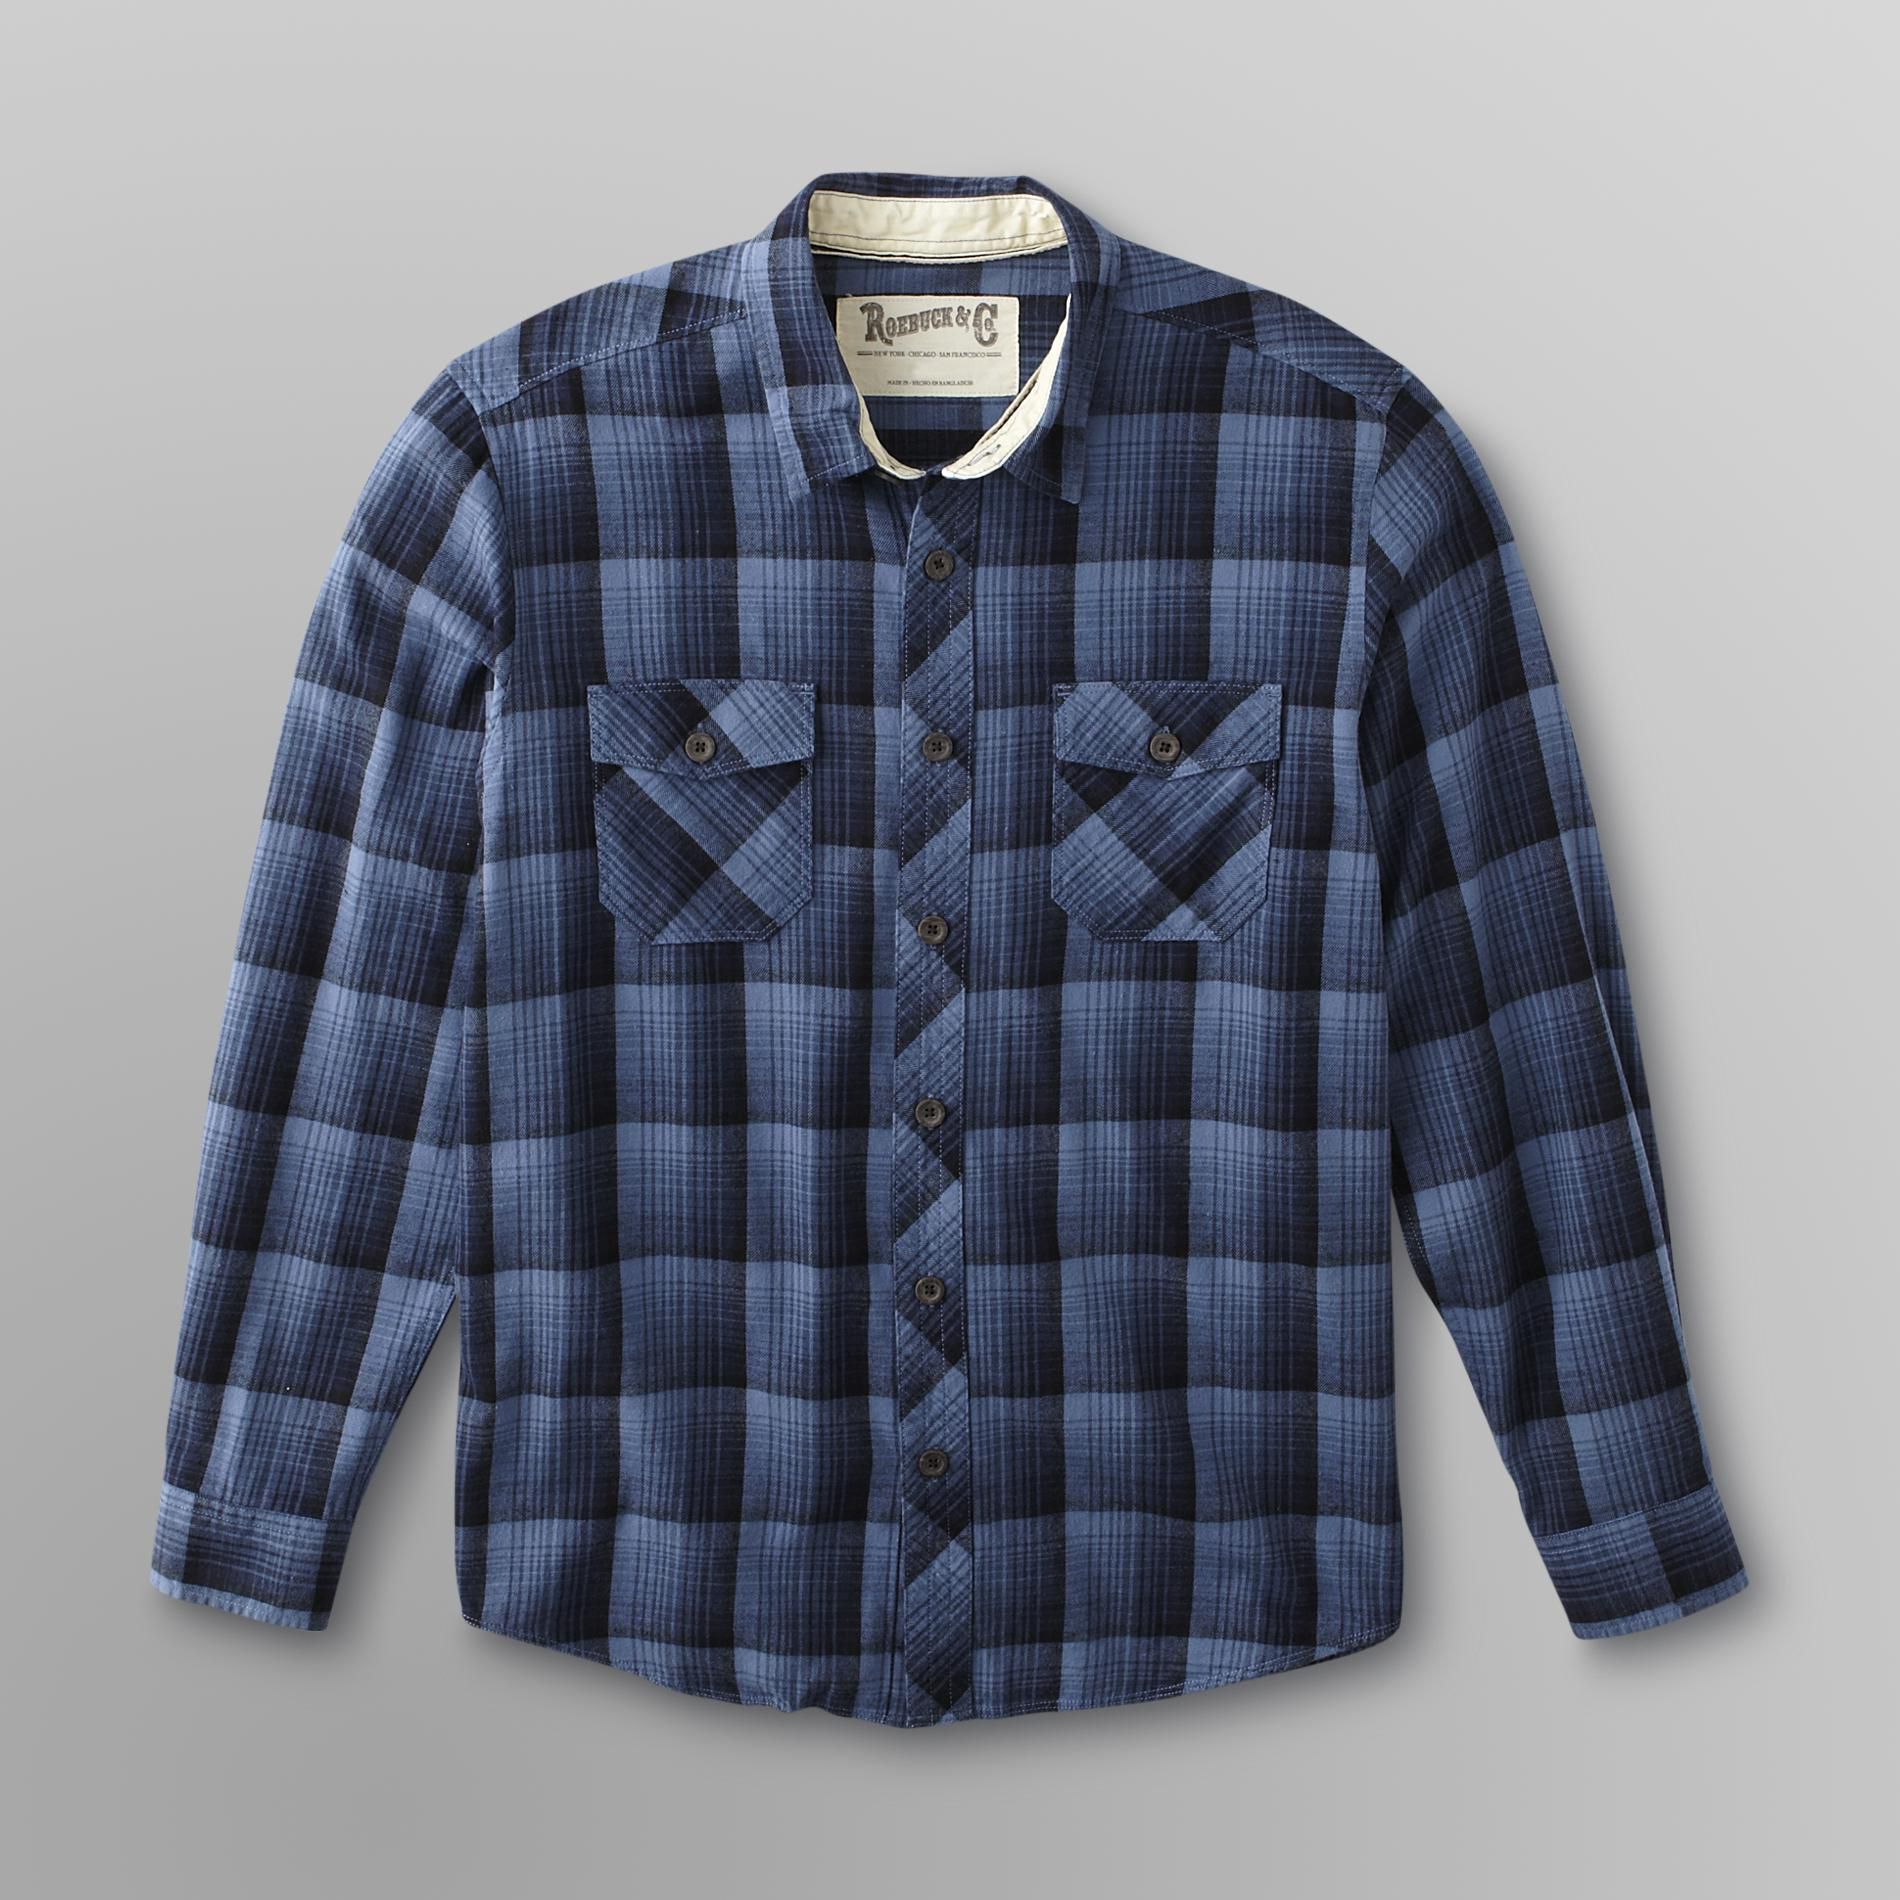 Roebuck & Co. Young Men's Plaid Flannel Shirt